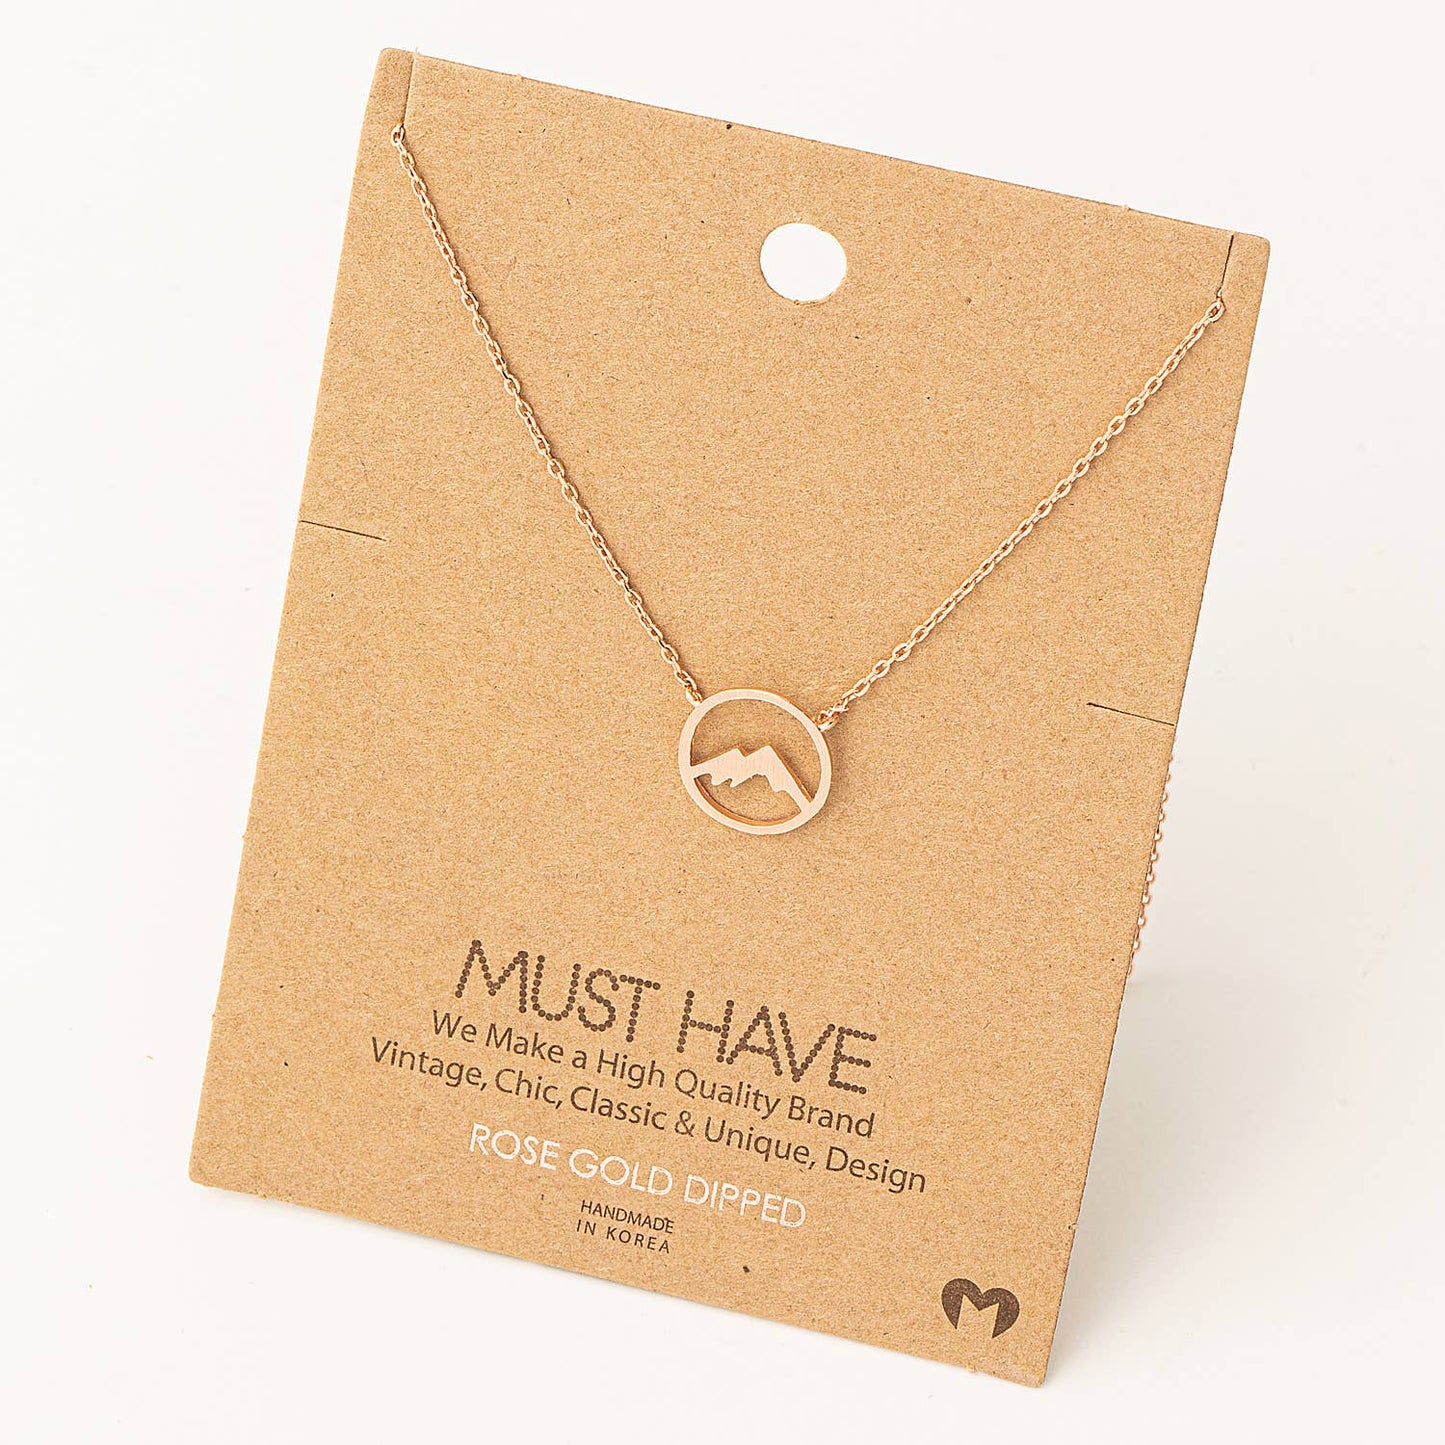 Mountain Range Pendant Necklace: Silver, Gold or Rose Gold